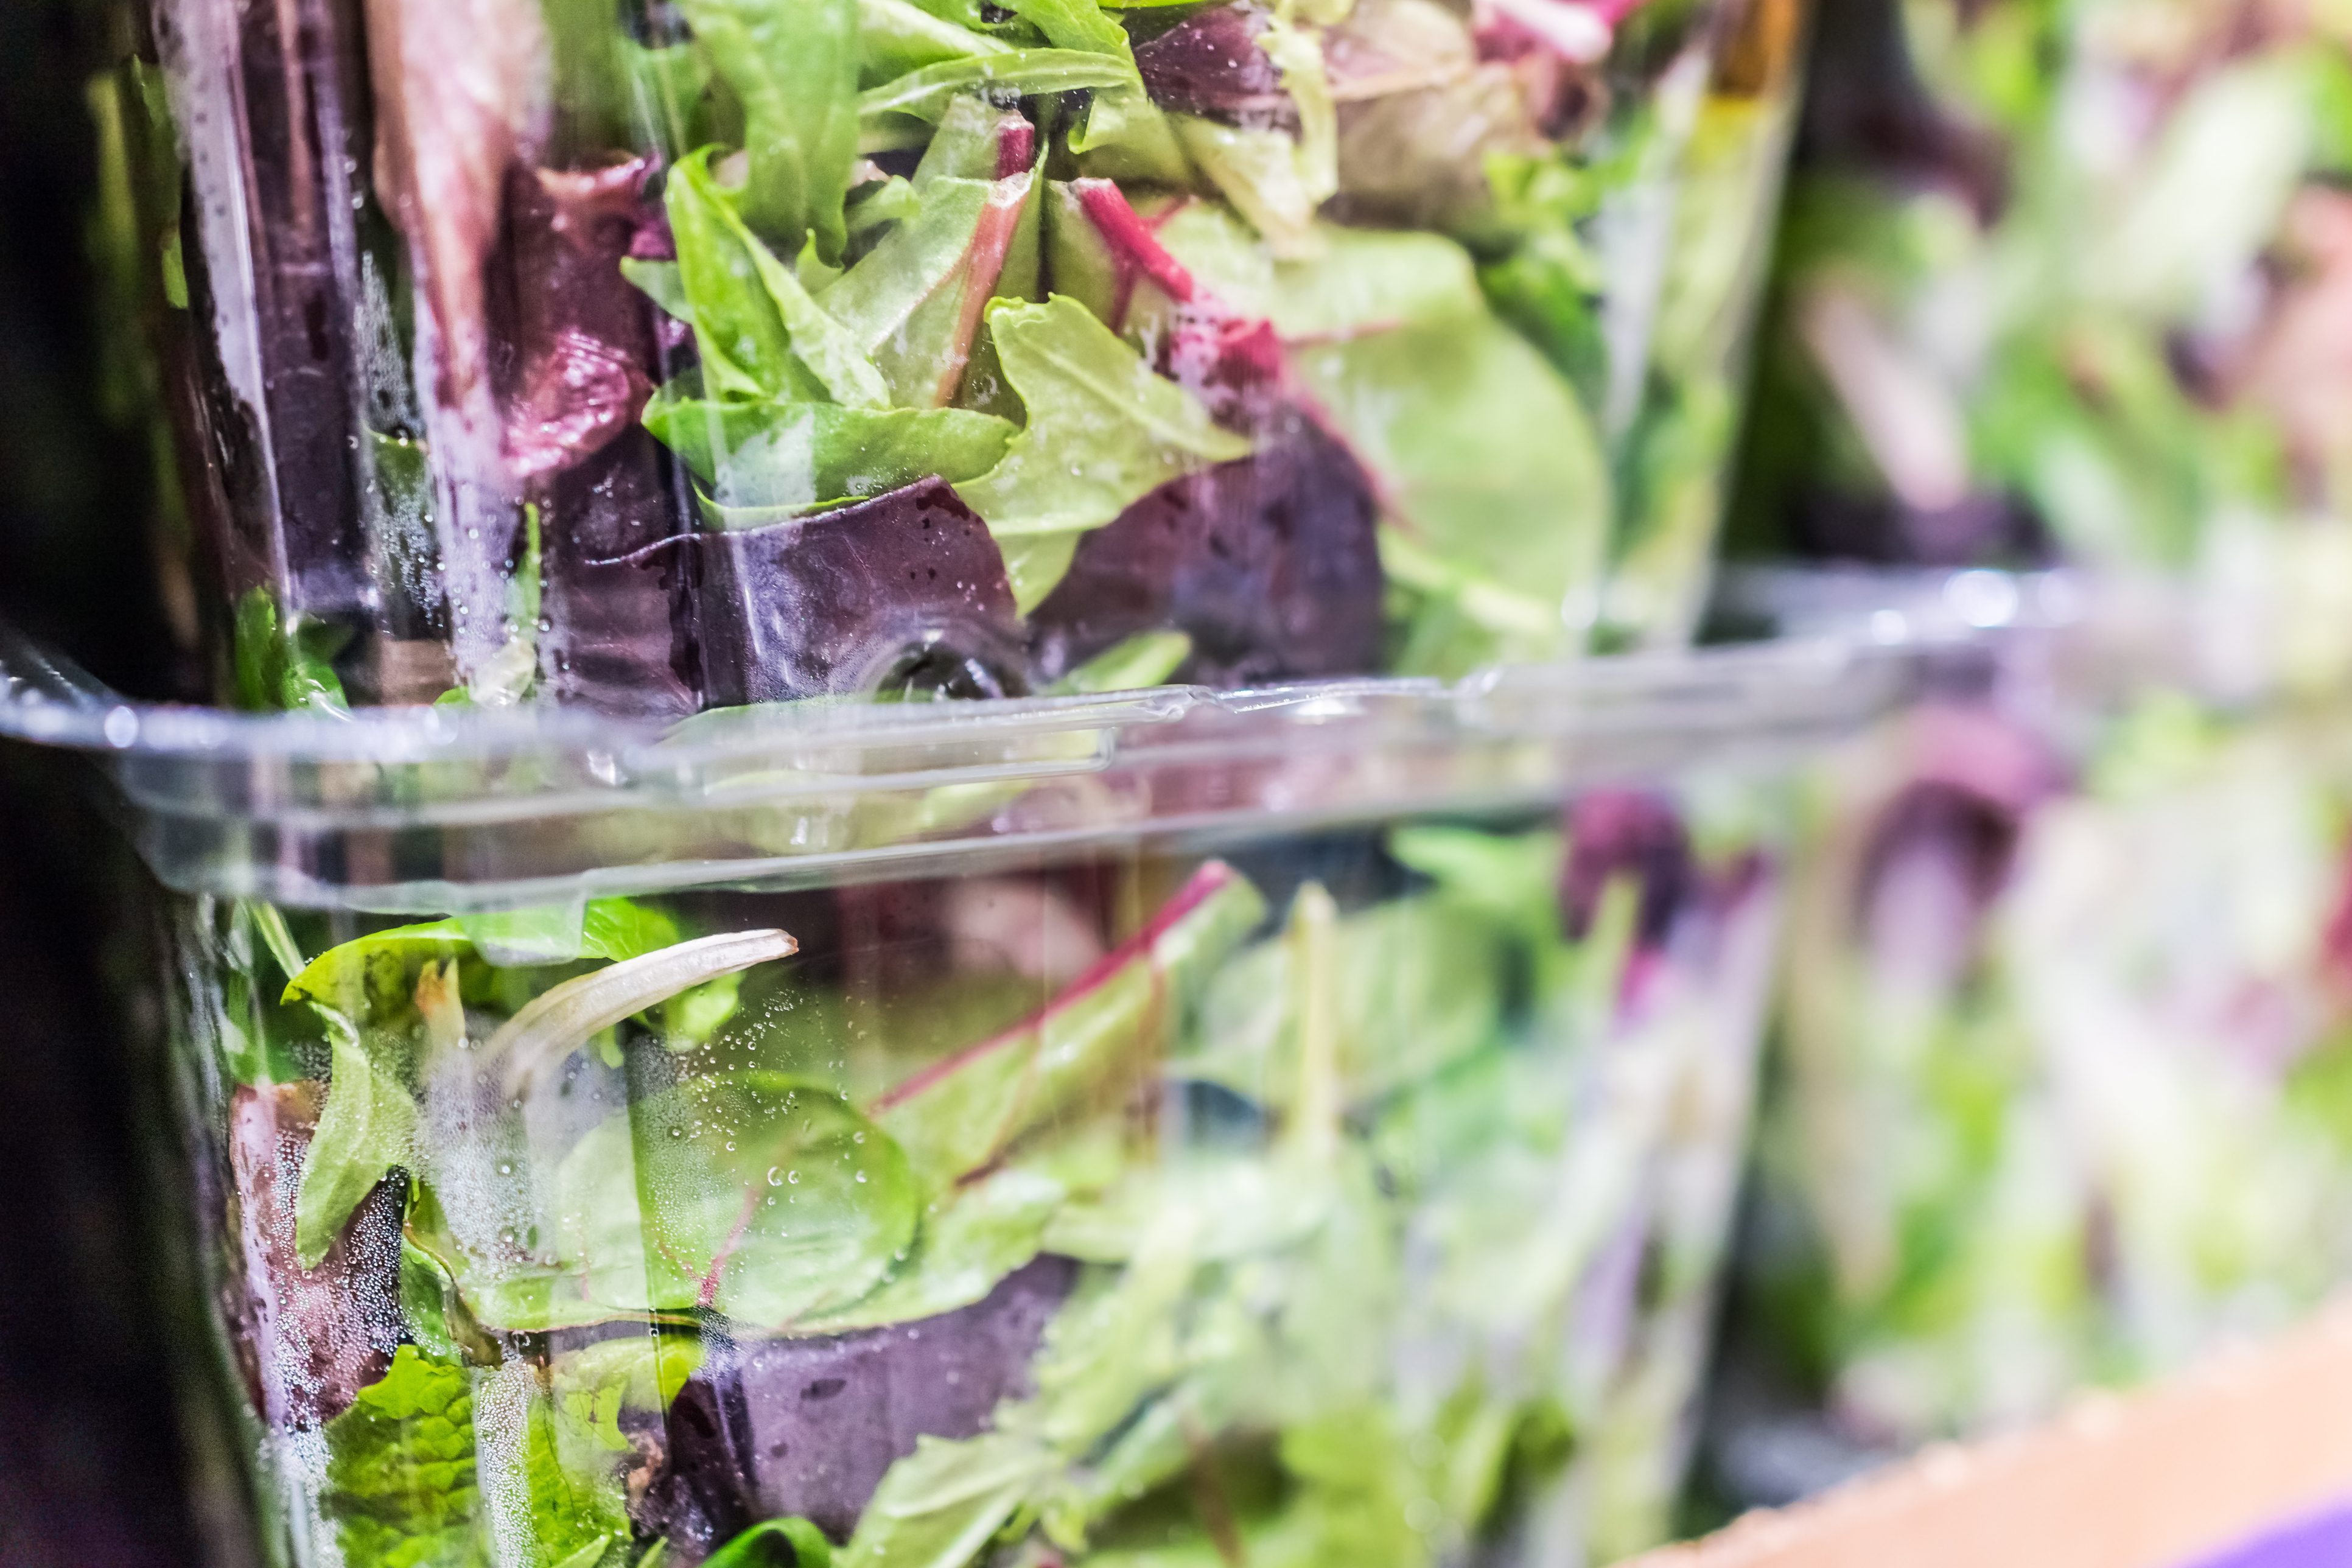 salad in plastic pollution boxes